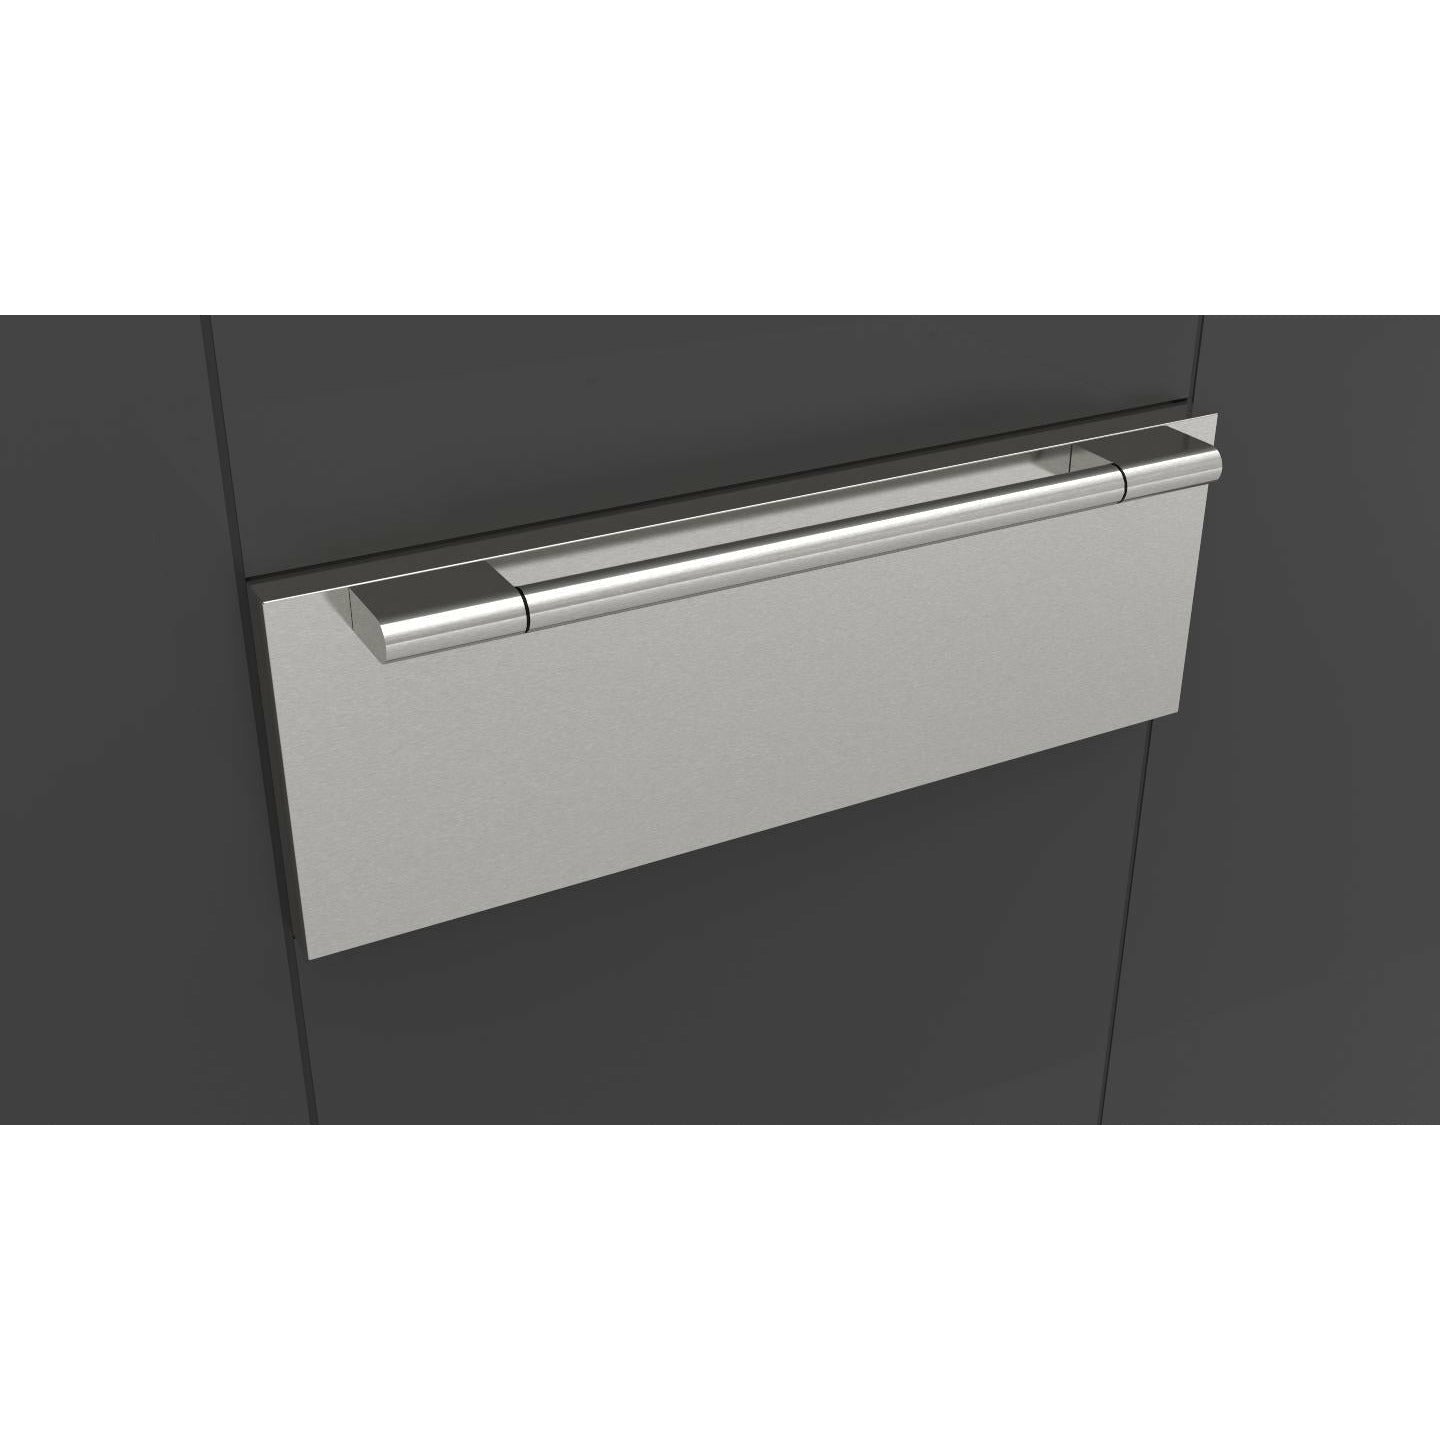 Fulgor Milano 30" Warming Drawer with 2.1 cu. ft. Capacity - F6PWD30S1 Warming Drawers F6PWD30S1 Luxury Appliances Direct